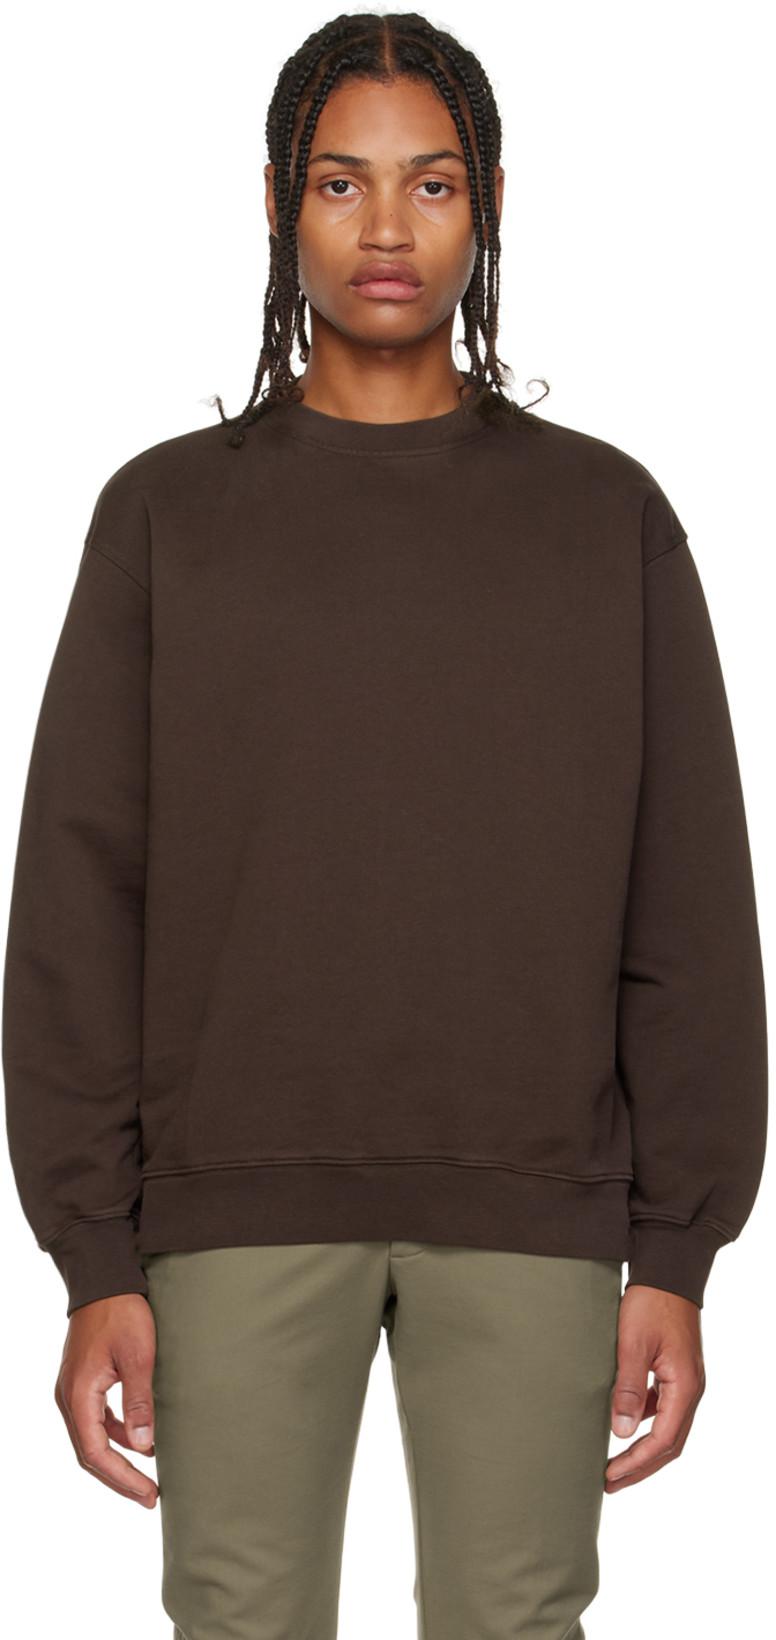 Brown Rib Sweatshirt by ANOTHER ASPECT